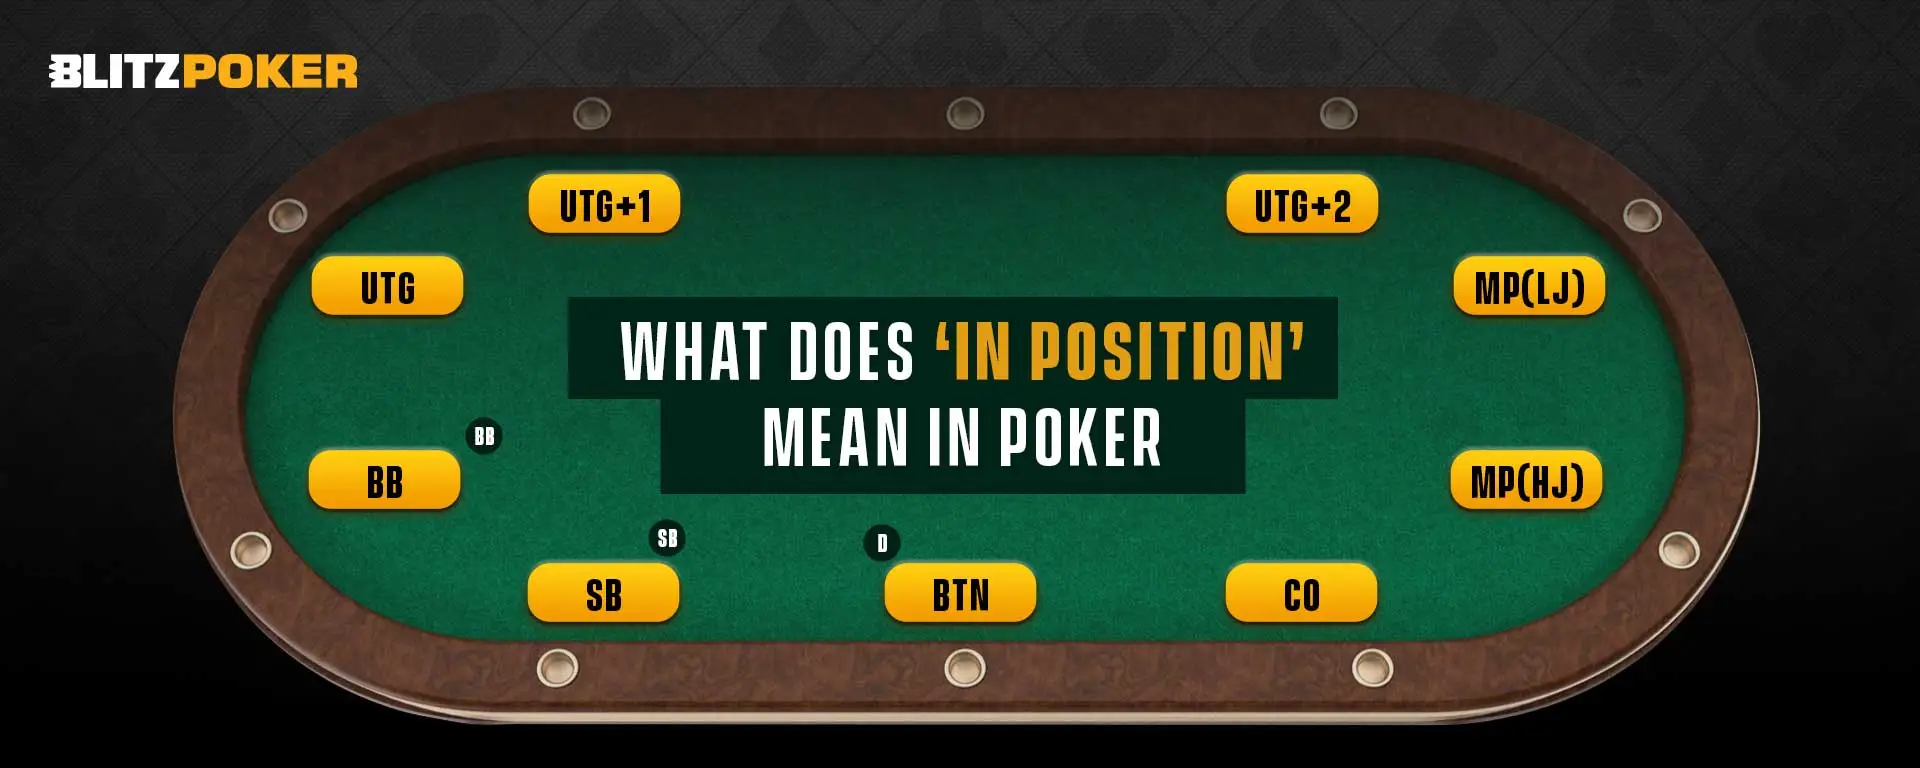 What Does ‘In Position’ Mean in Poker